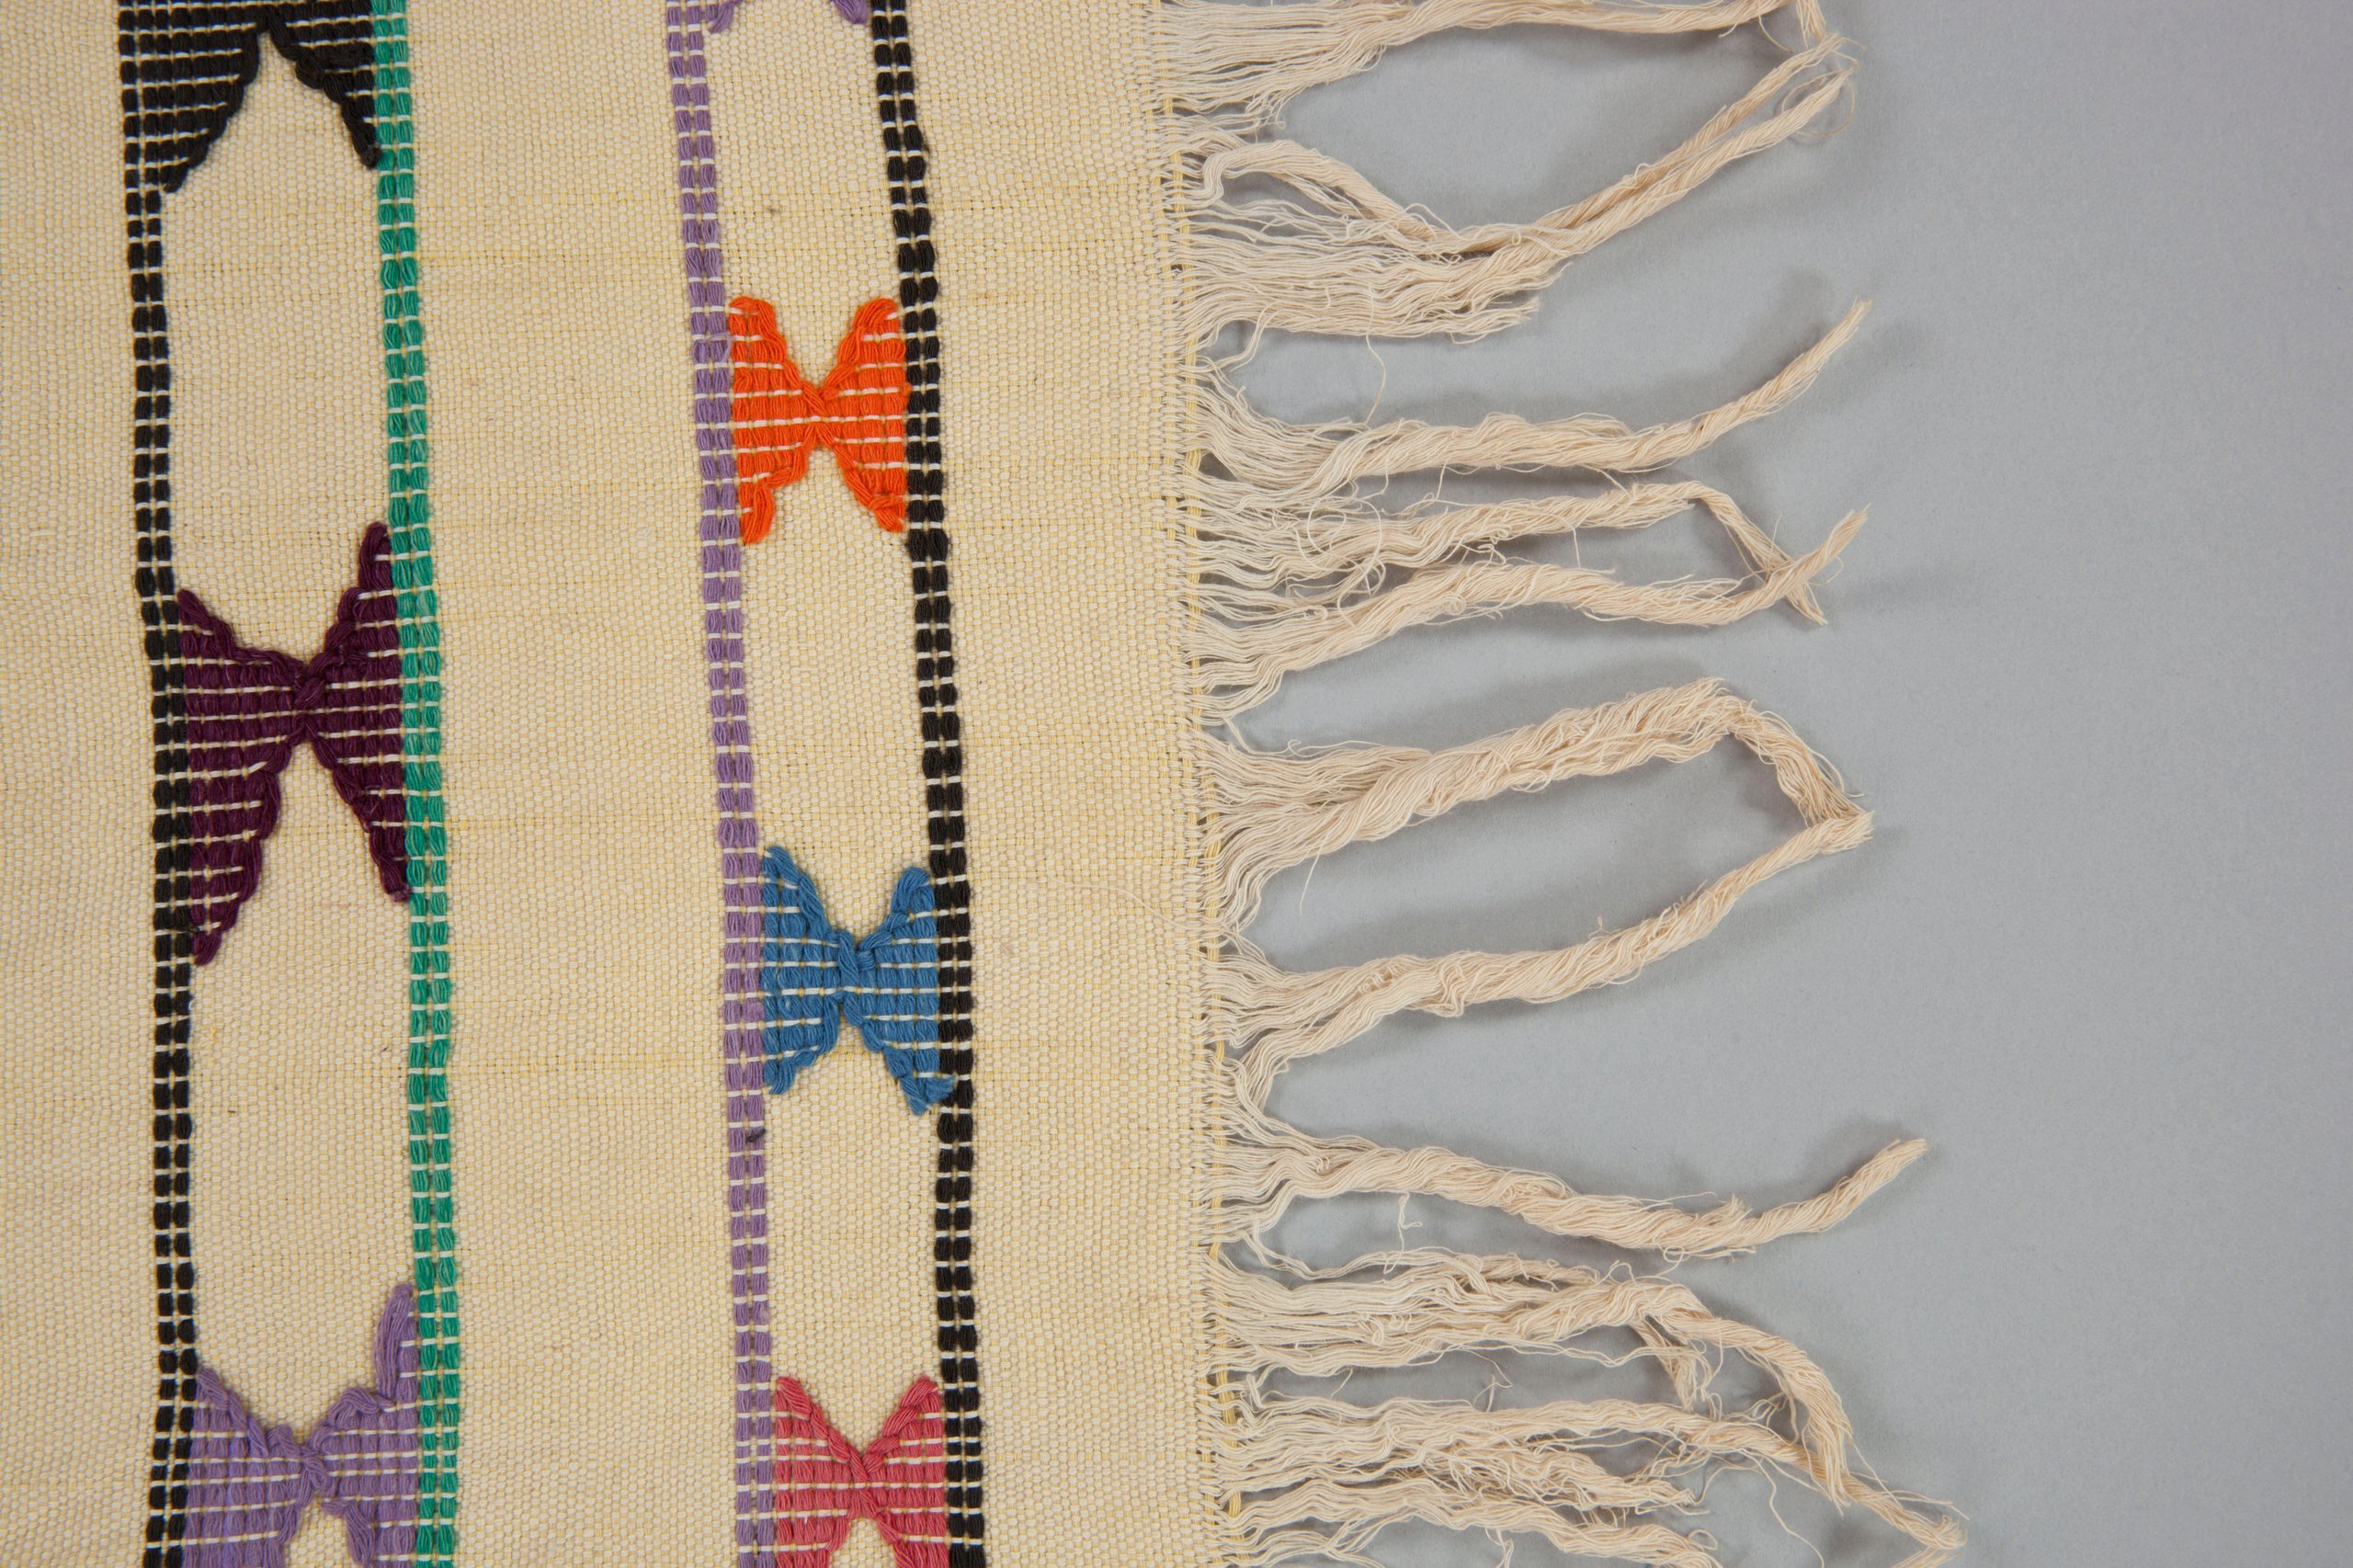 Ibo woman's woven wrapper, Akwete, West Africa